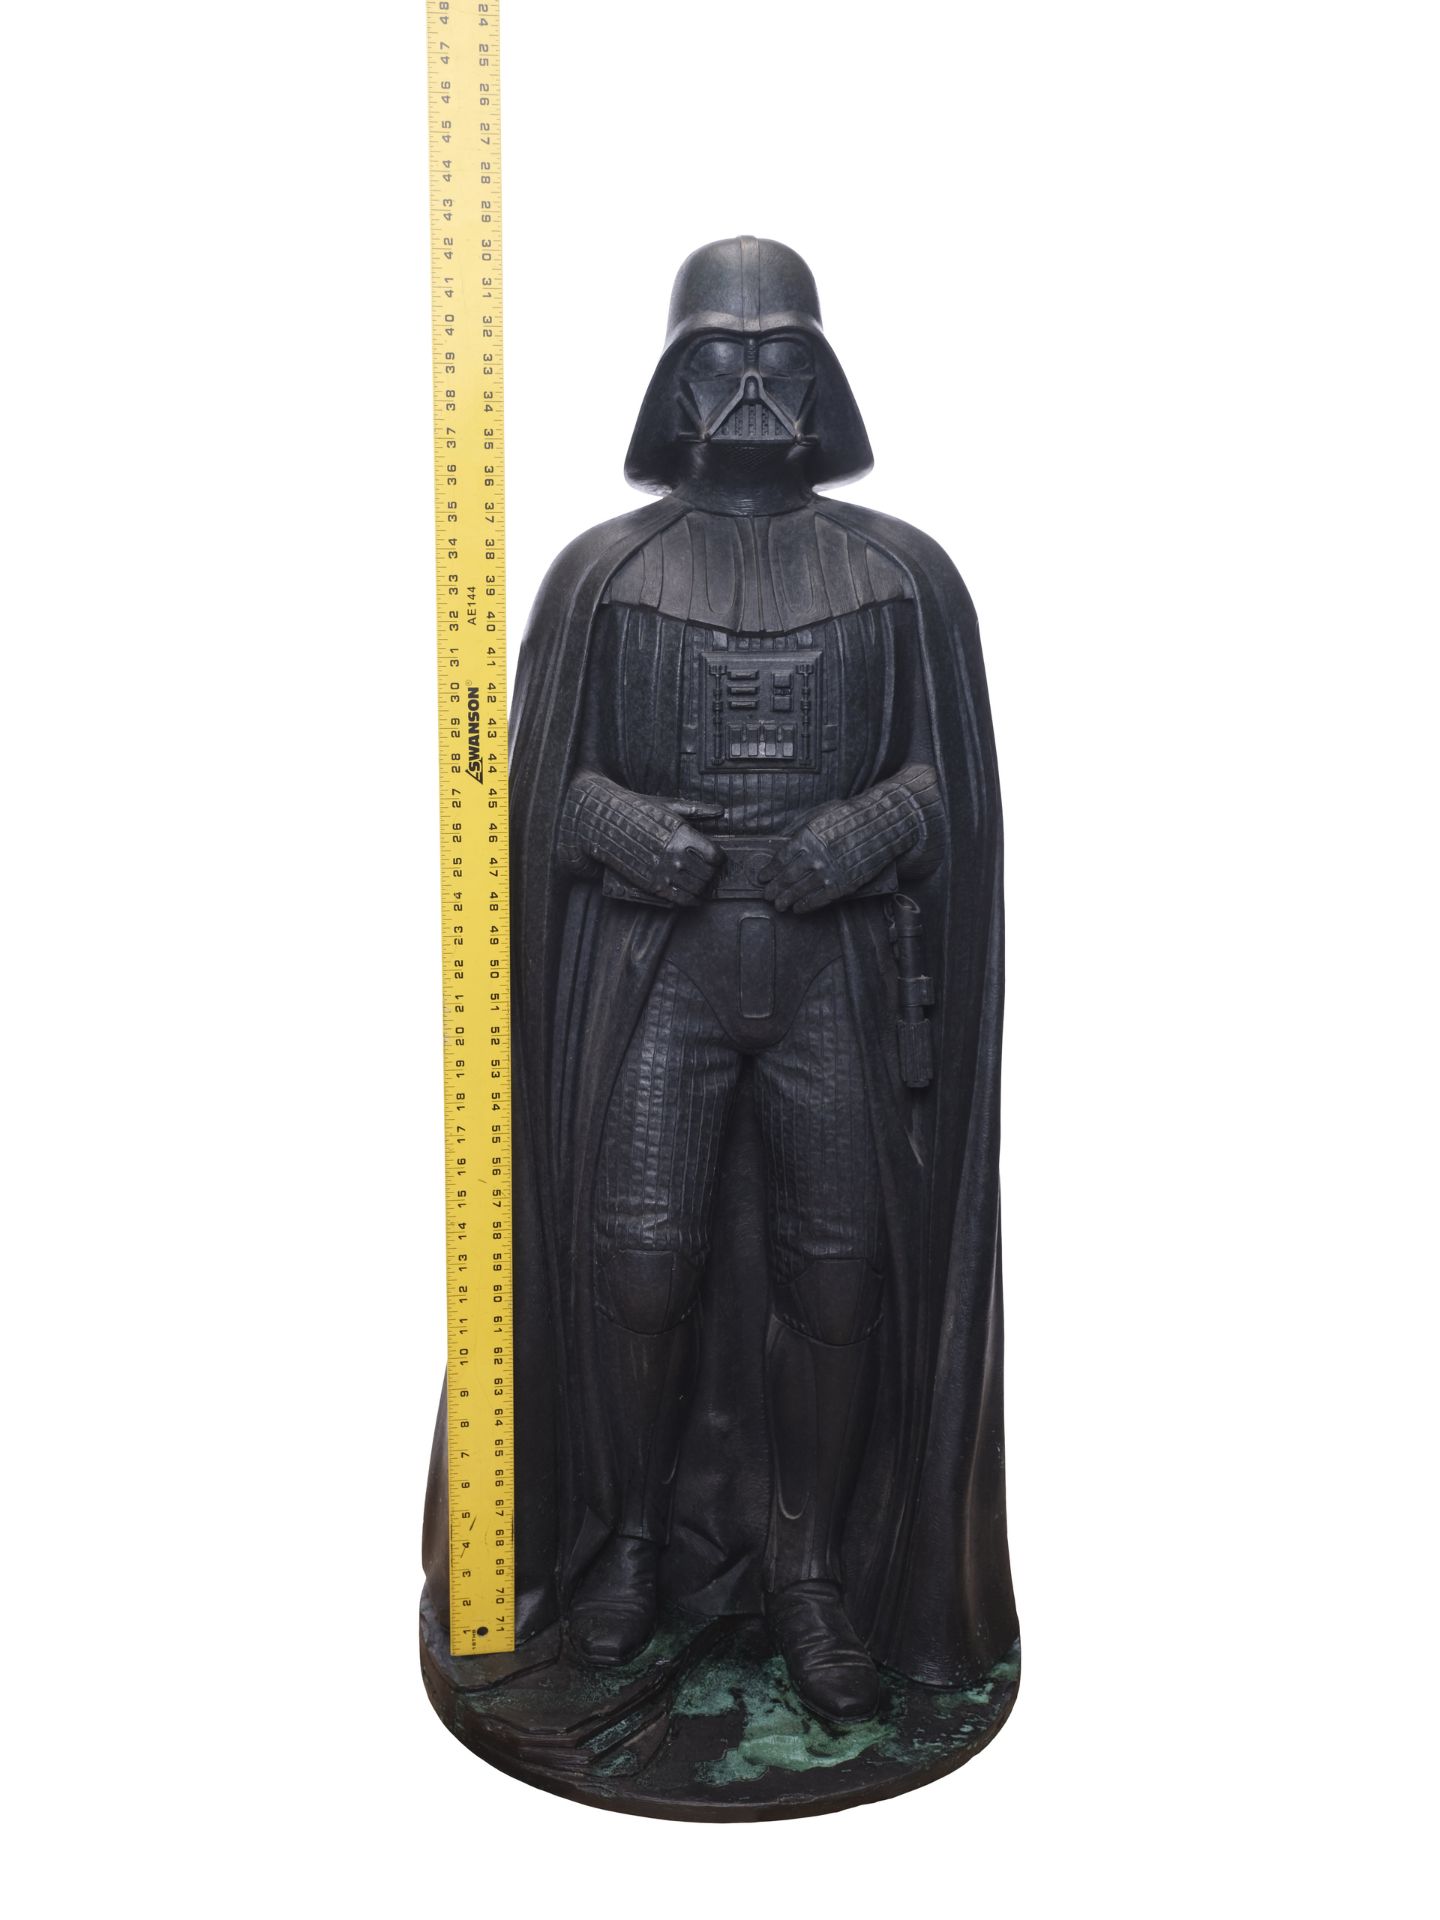 STAR WARS: ORIGINAL TRILOGY (1977-1983) - William Plumb Collection: Limited-Edition Half-Scale Lawre - Image 8 of 8